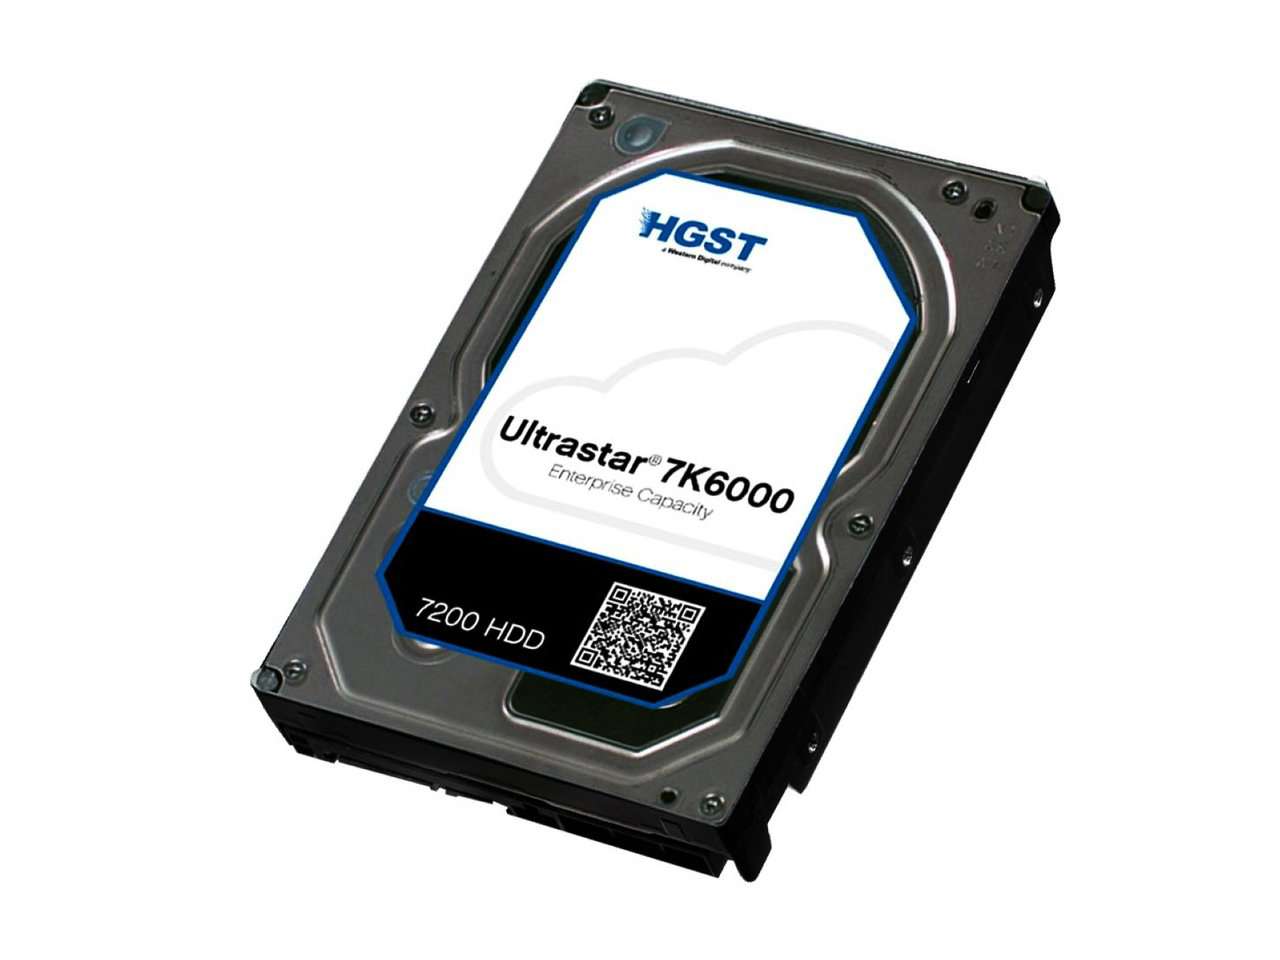 HGST Ultrastar 7K6000 0F22794  HUS726040AL4210 4TB 7.2K RPM SAS 12Gb/s 4Kn 128MB Cache 3.5" ISE Manufacturer Recertified HDD